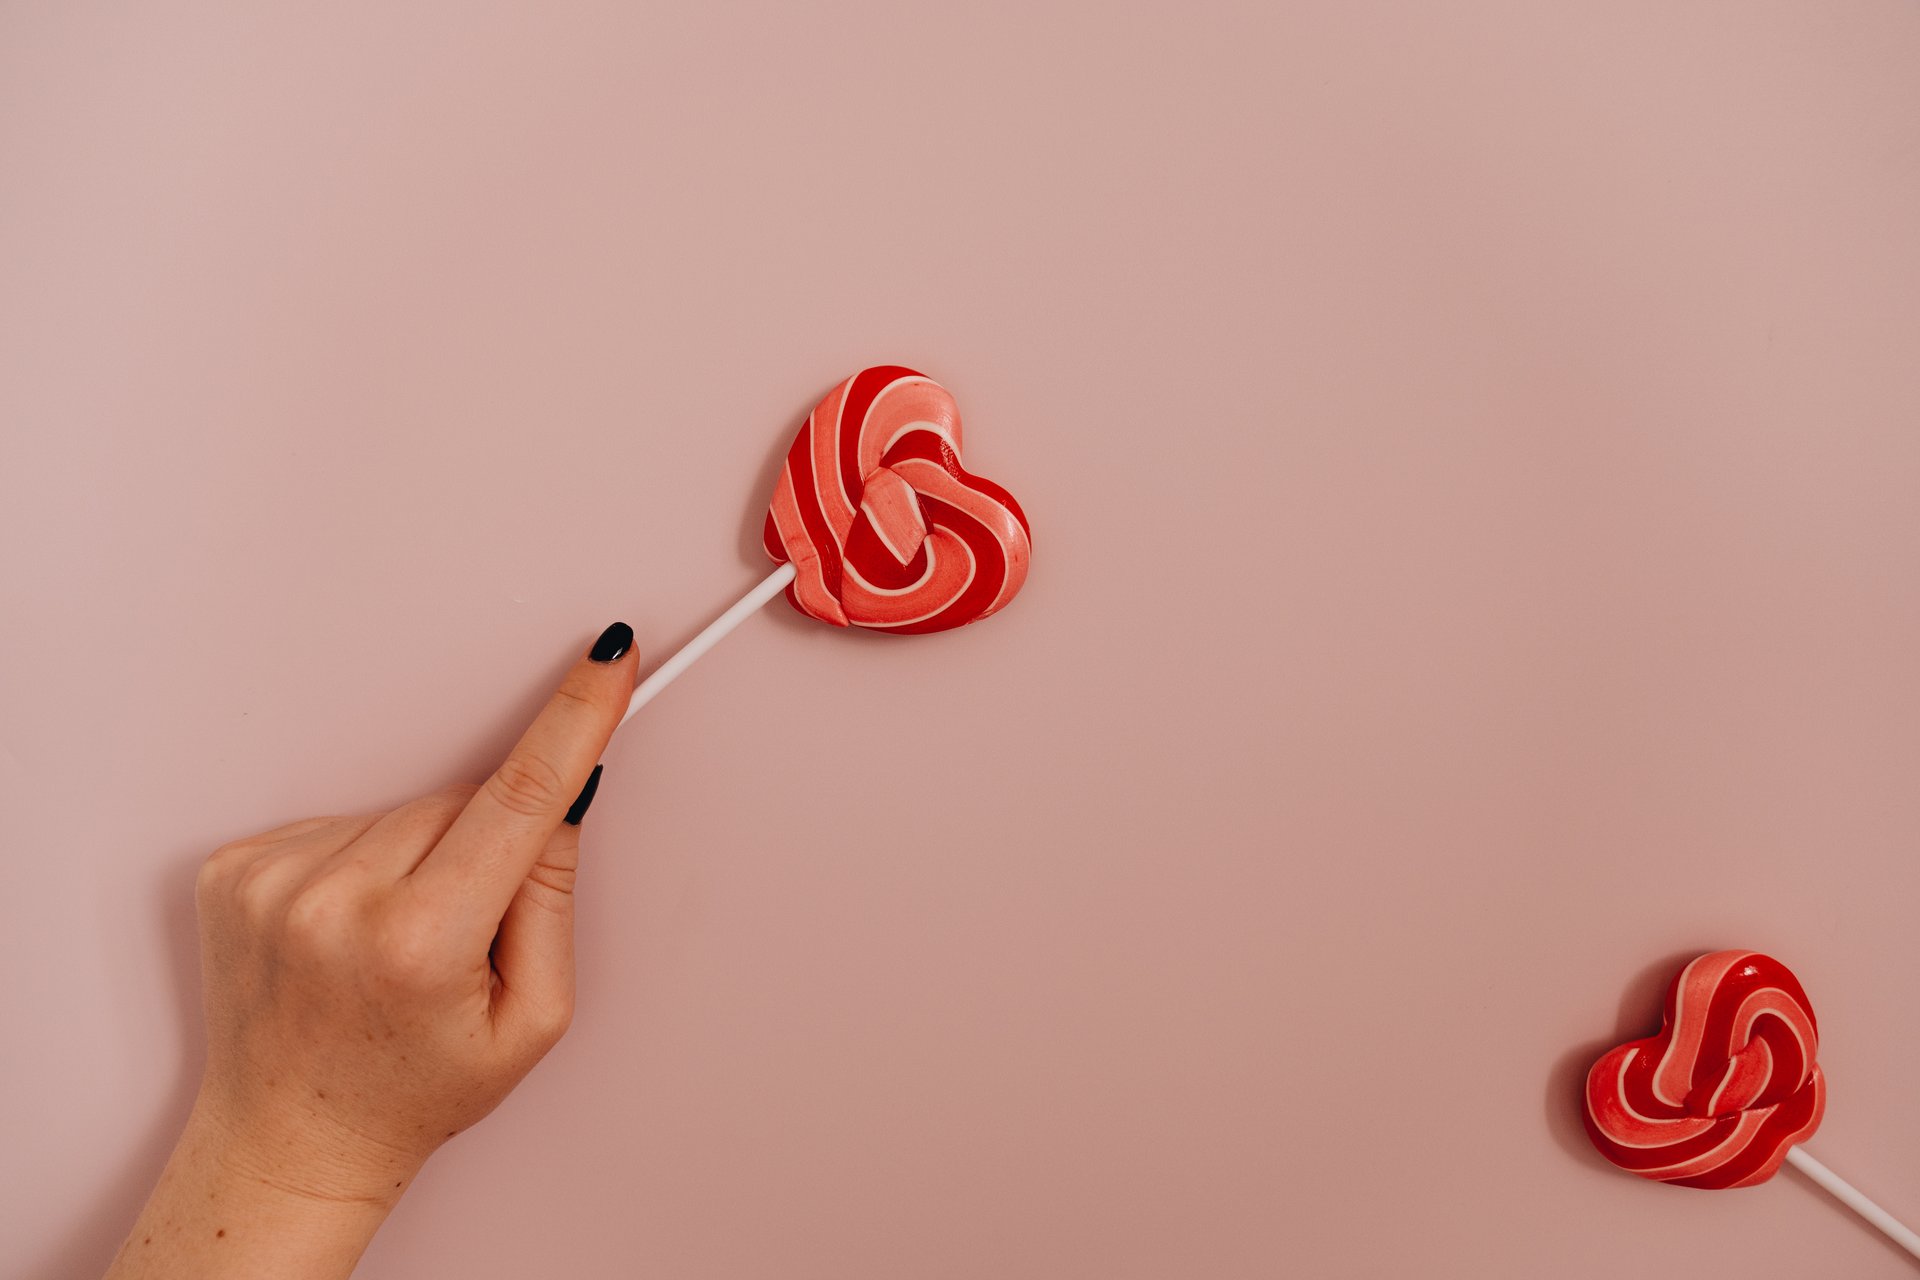 Hand-holding-a-lollipop-over-a-pink-background